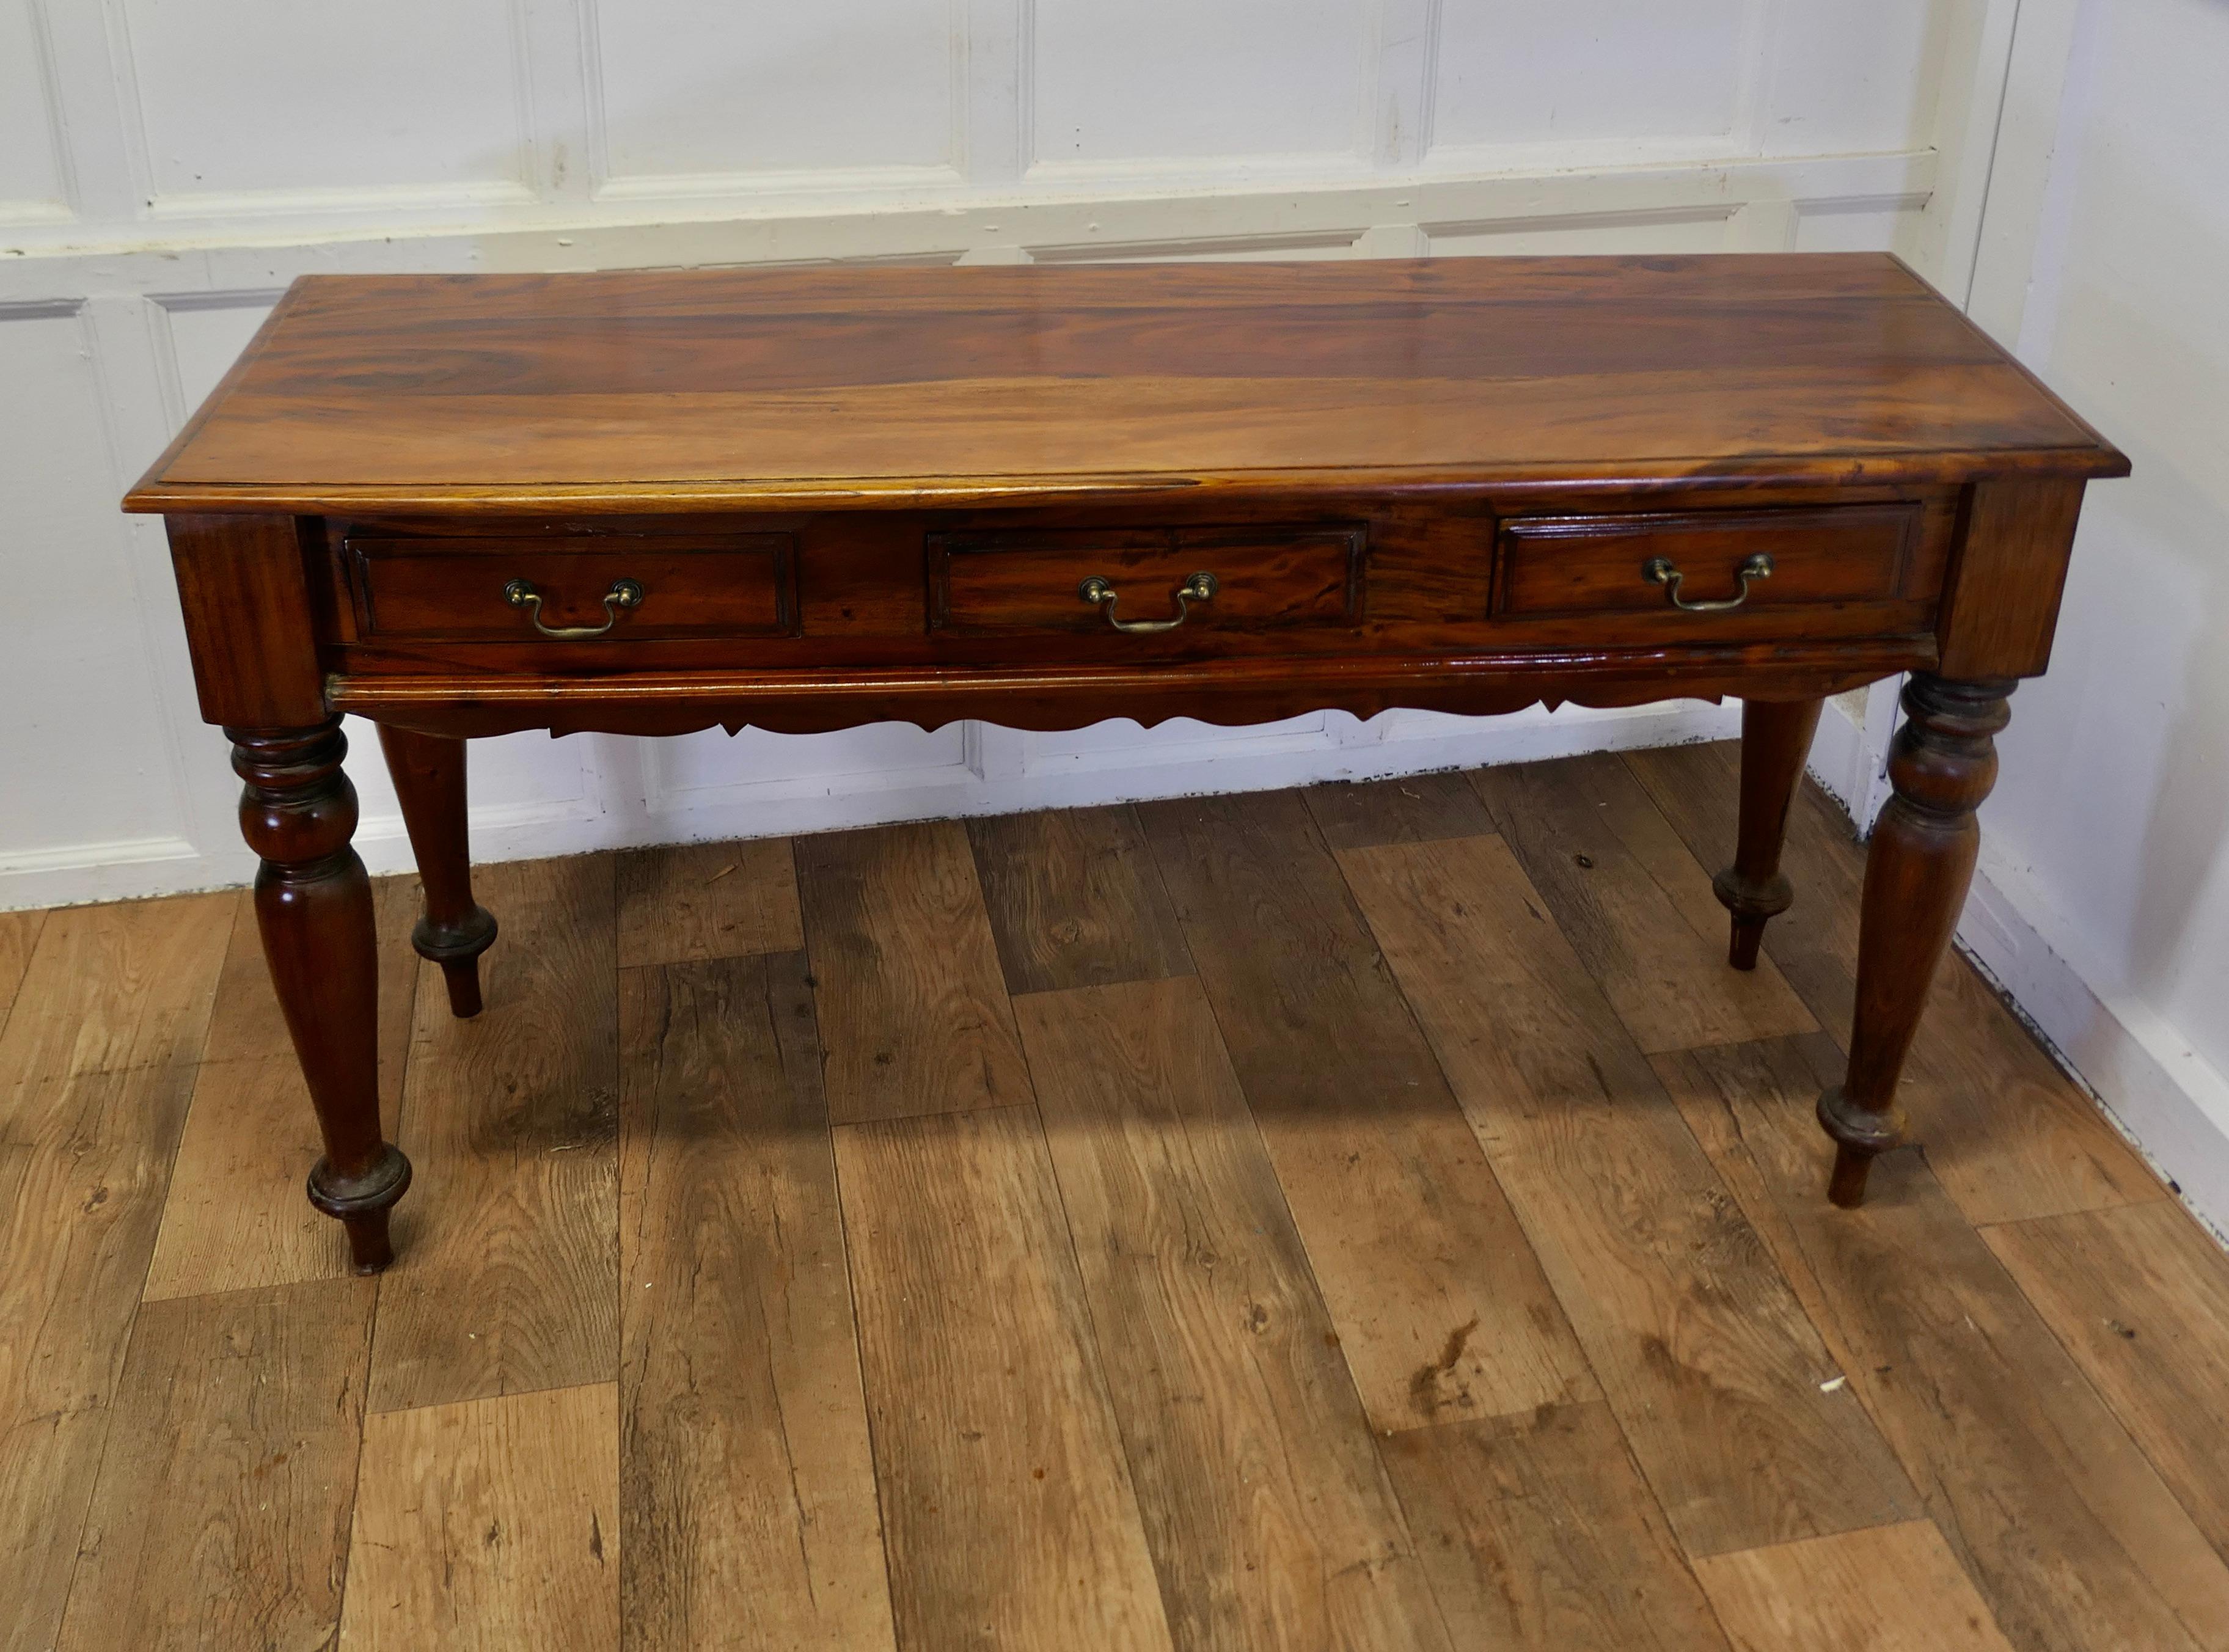 Long Fruitwood Hall Table, Serving Table

This is a very attractive piece it is made in fruitwood which has a very attractive grain and patina
The table is set on chunky turned legs and has 3 drawers to the front with a scalloped apron beneath, it